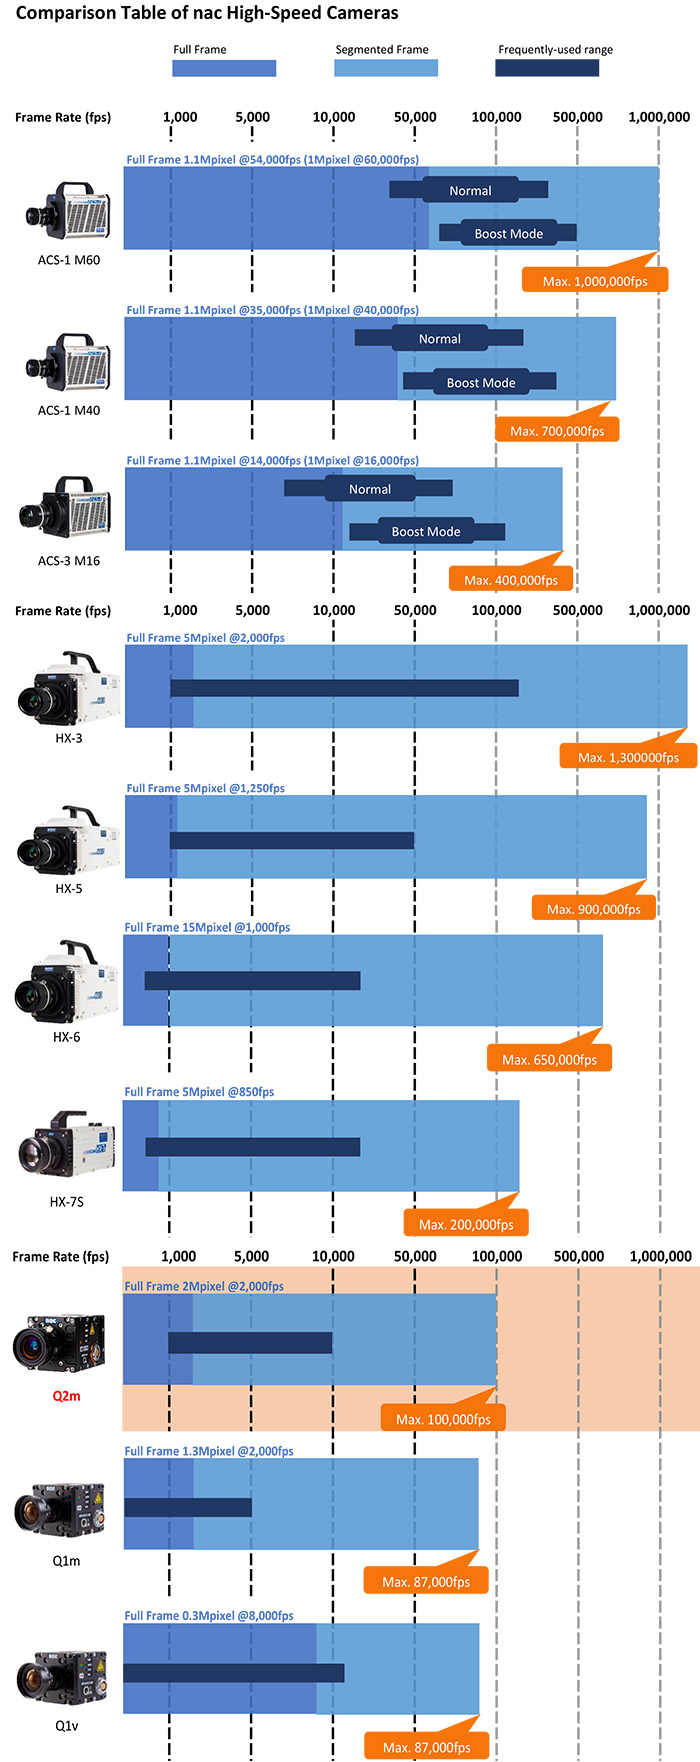 Comparison of Frame Rates for NAC High Speed Cameras